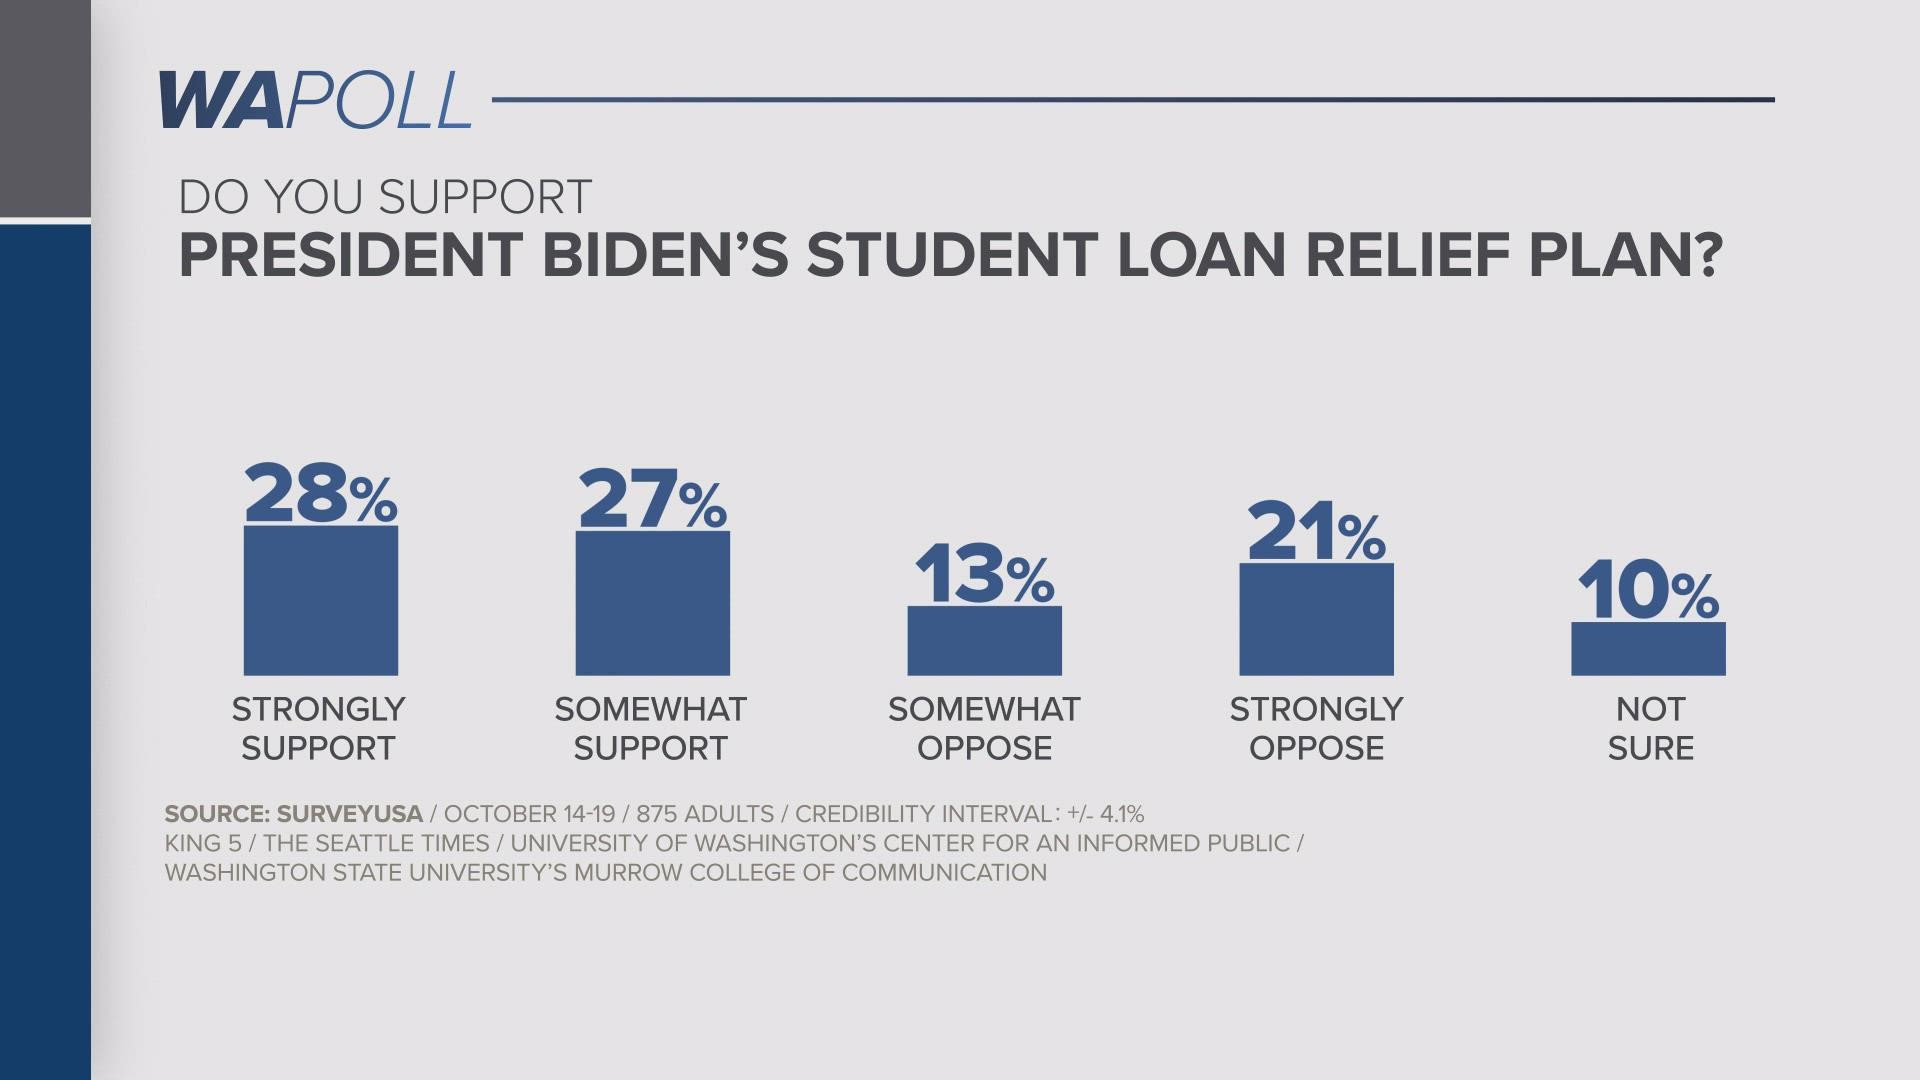 Support for the student loan forgiveness is split between Democrats and Republicans in Washington State.